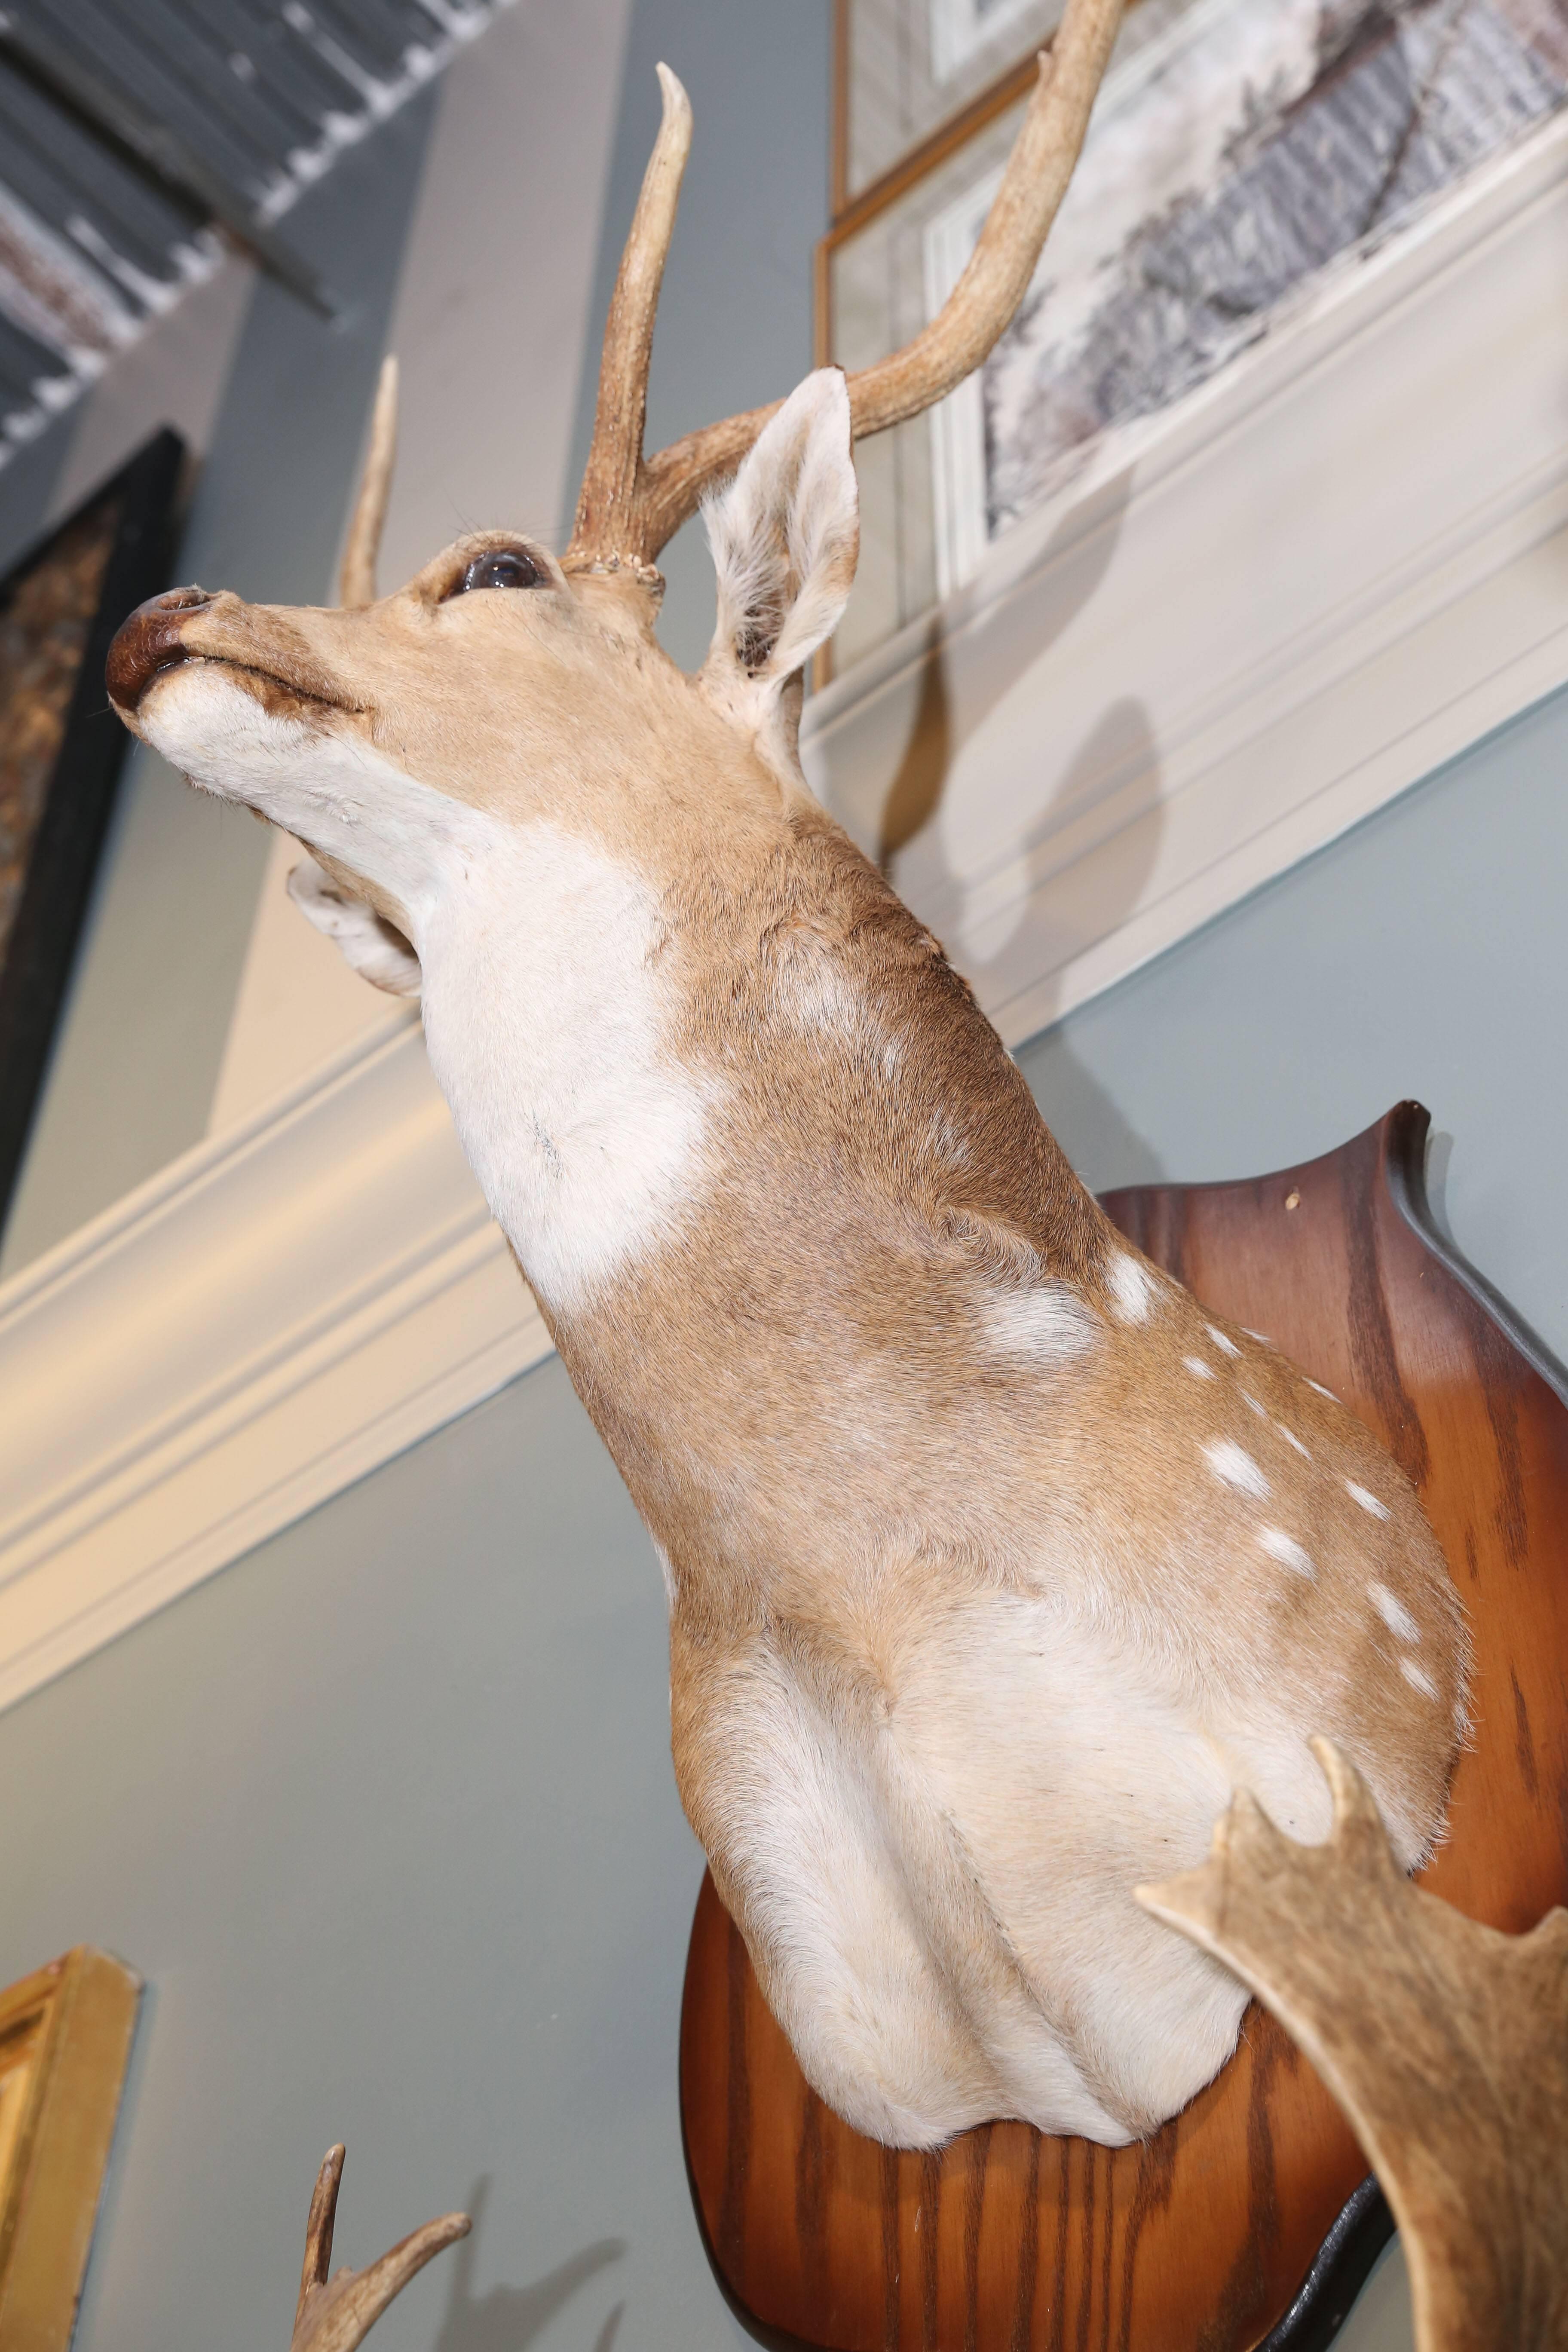 American Two Taxidermy Deer Mounted on Plaques sold separately For Sale